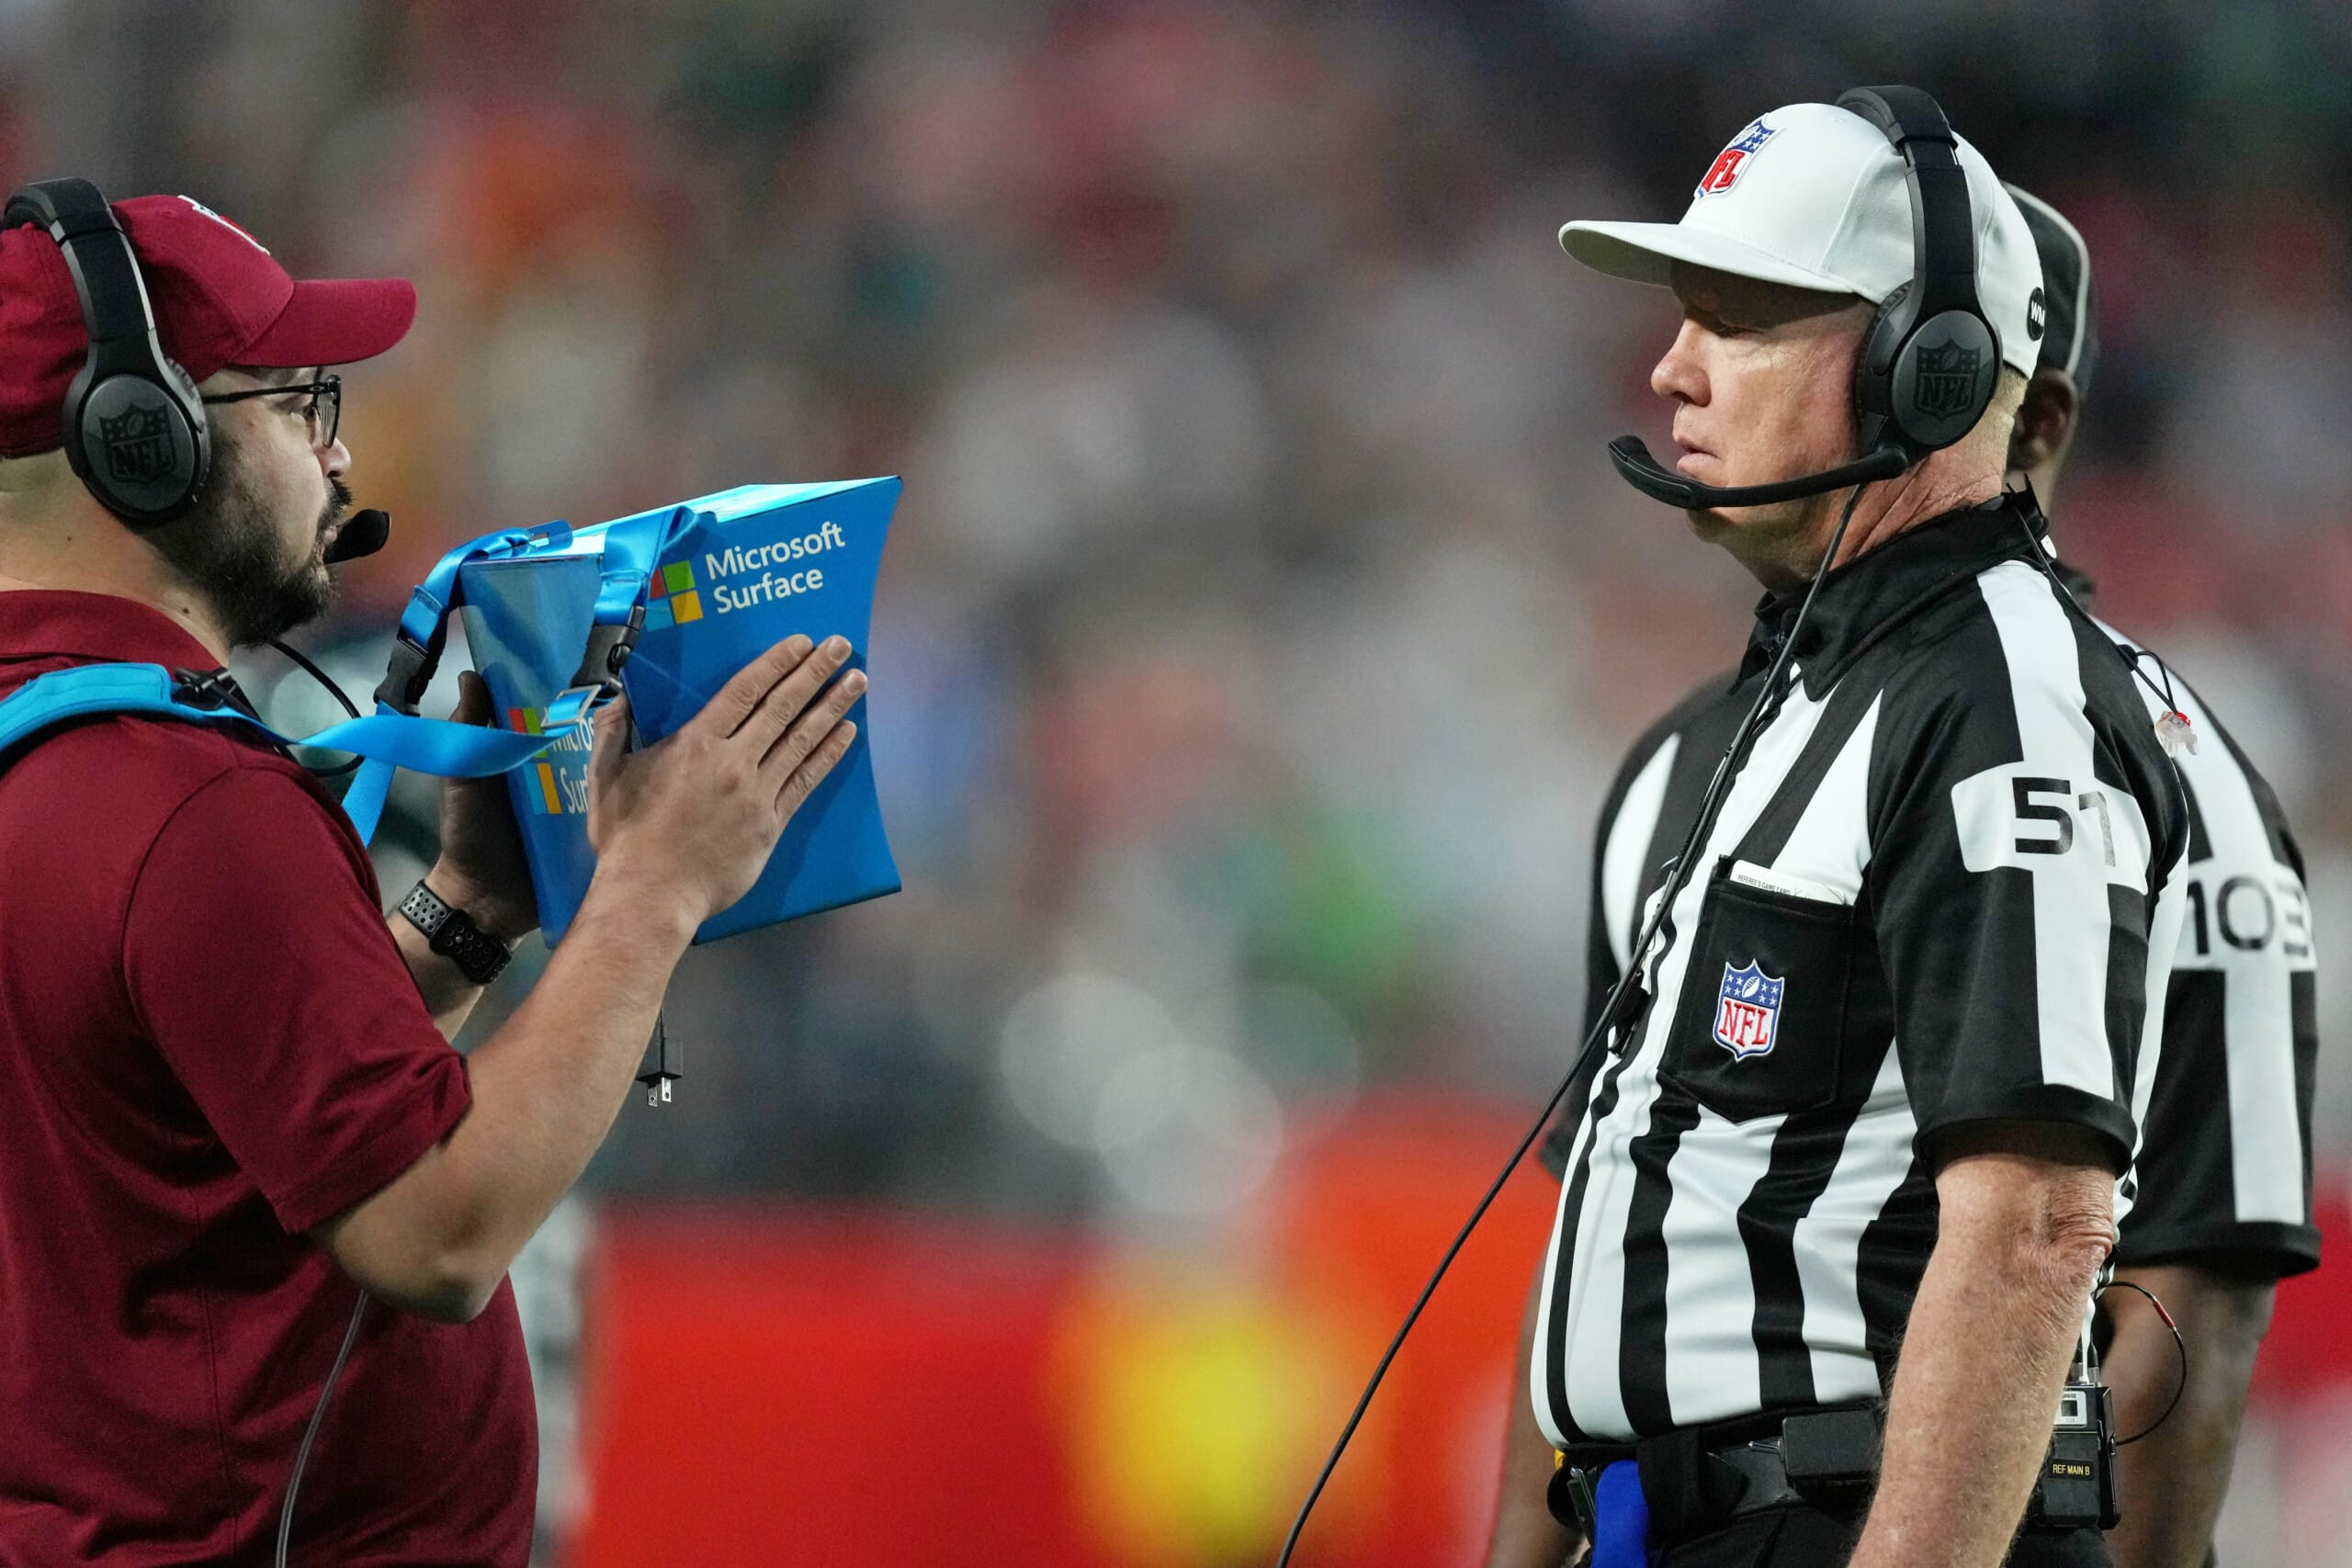 NFL referees have had a tough time this season and work cut out at Super Bowl.